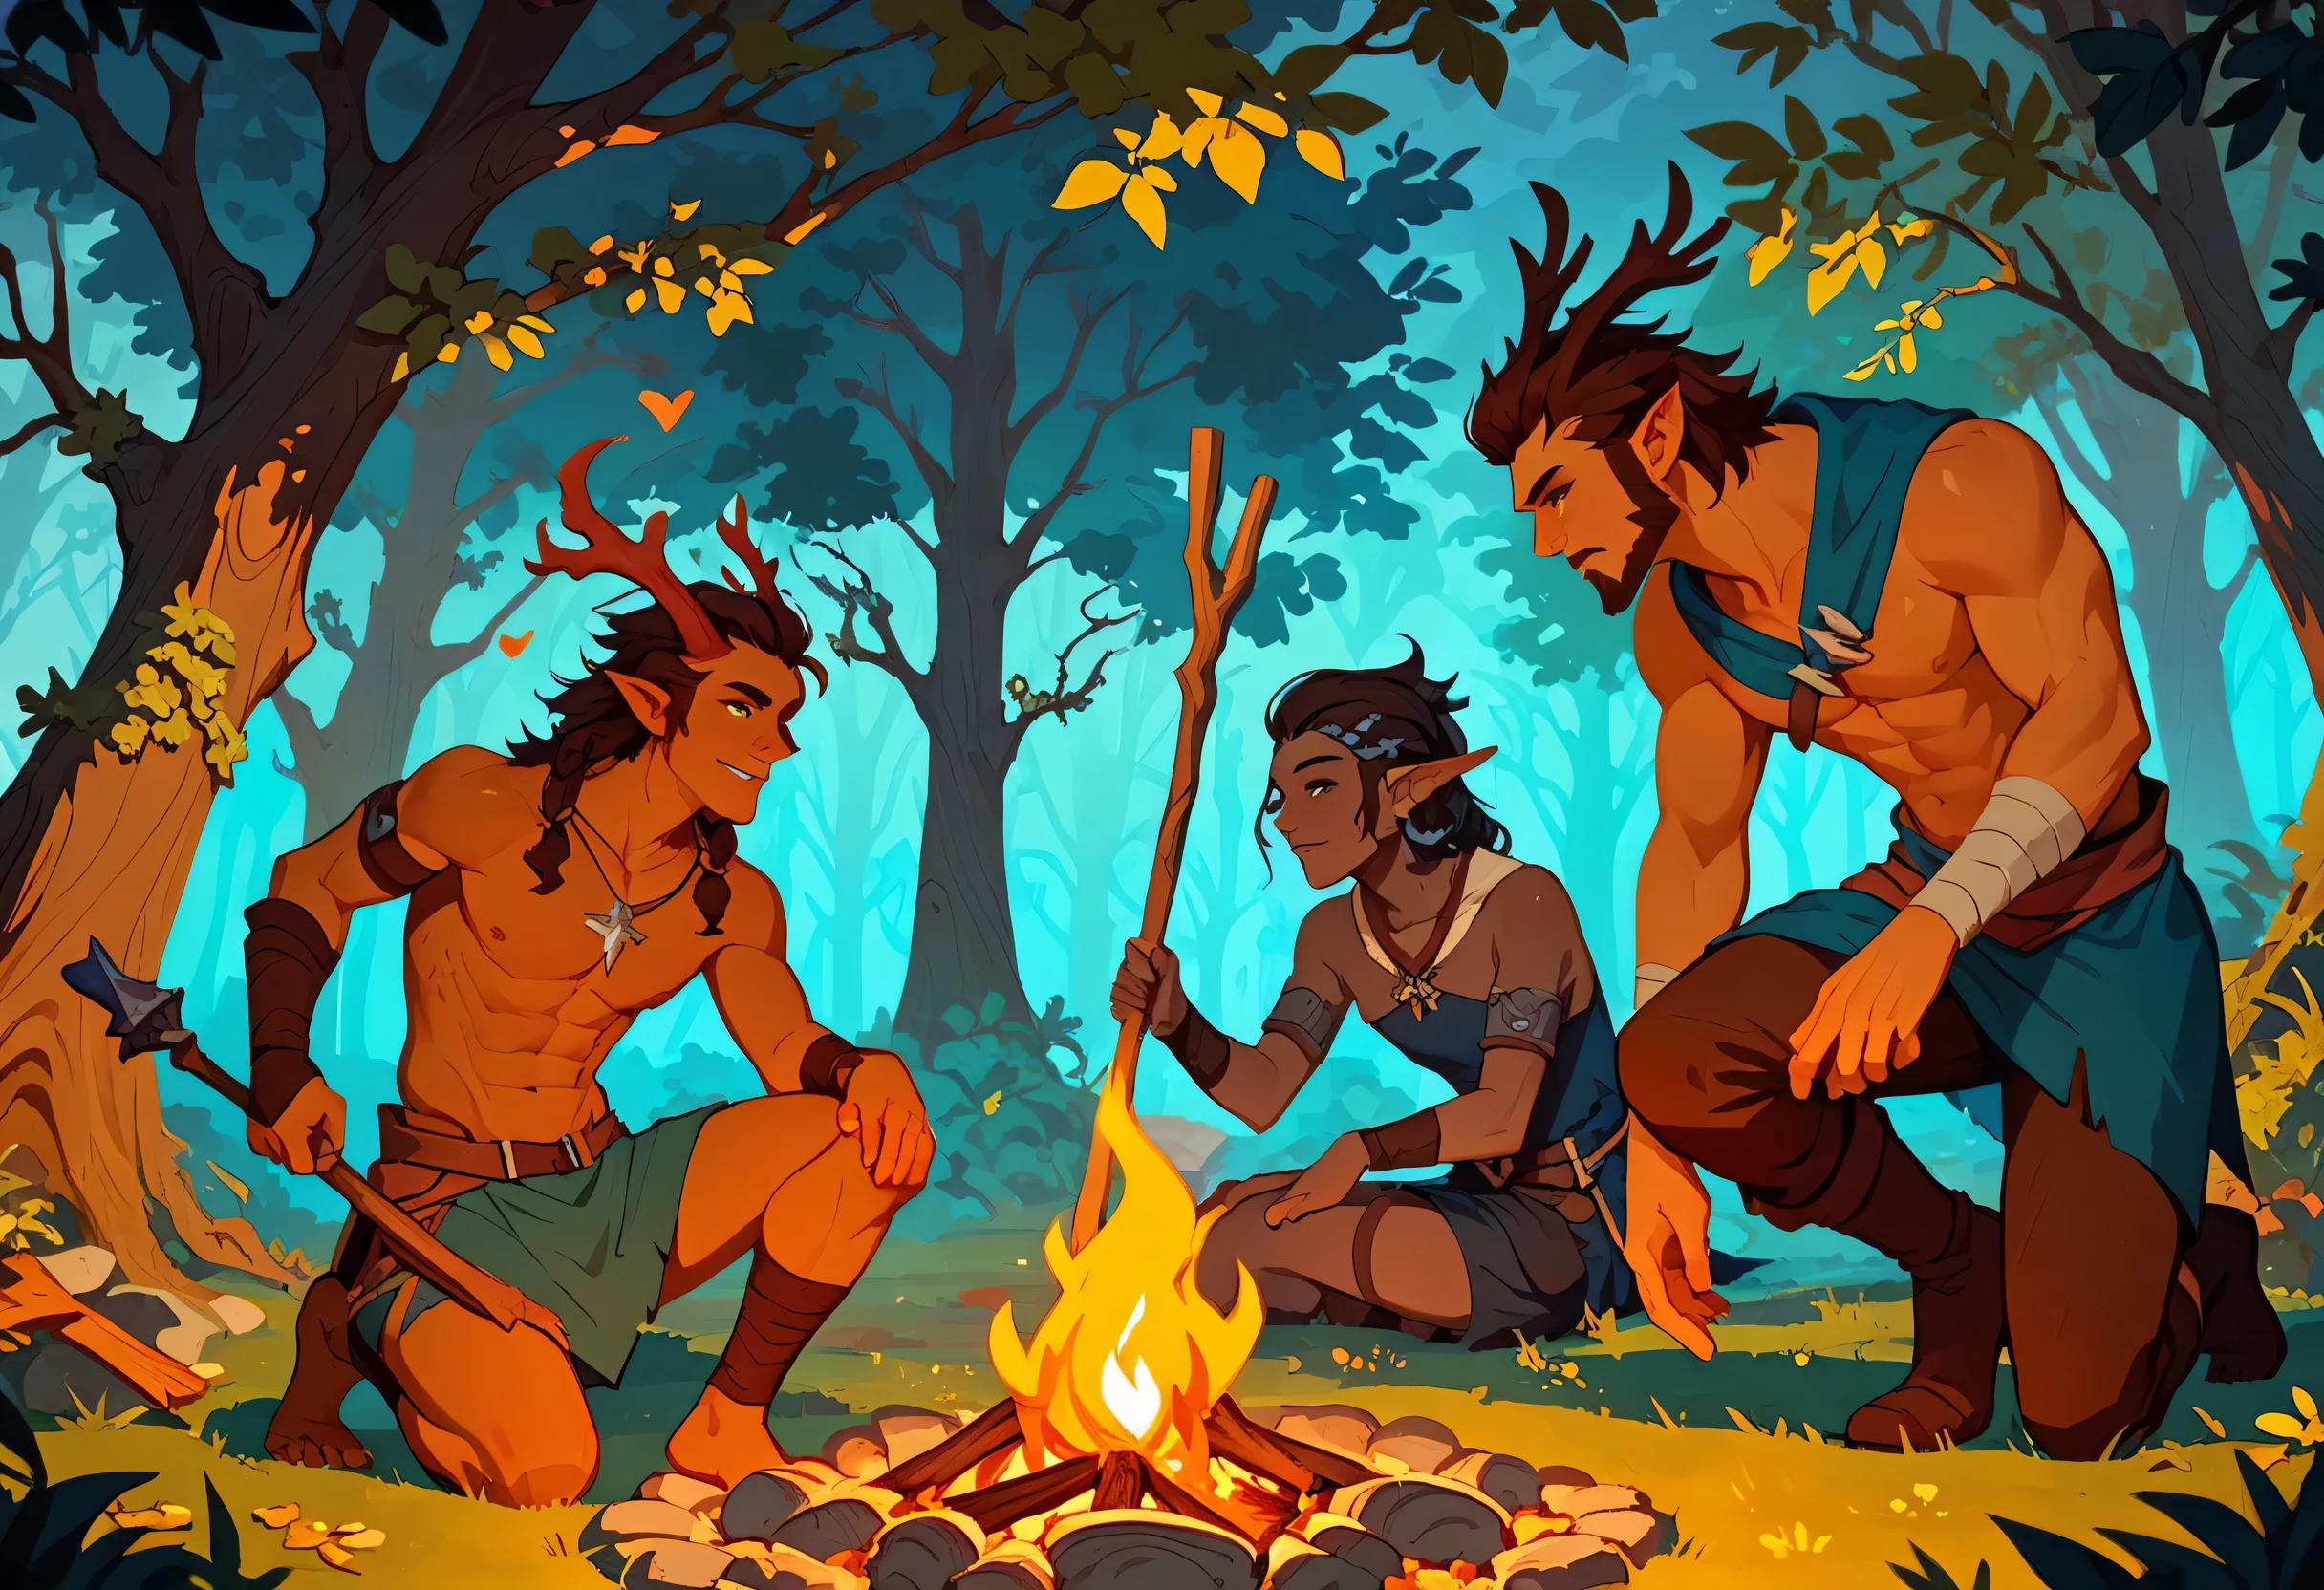 Score_9, score_8_up, score_7_up digital  illustration of a group of battle adventurers around a campfire tired and weary, dark fantasy setting, night forest